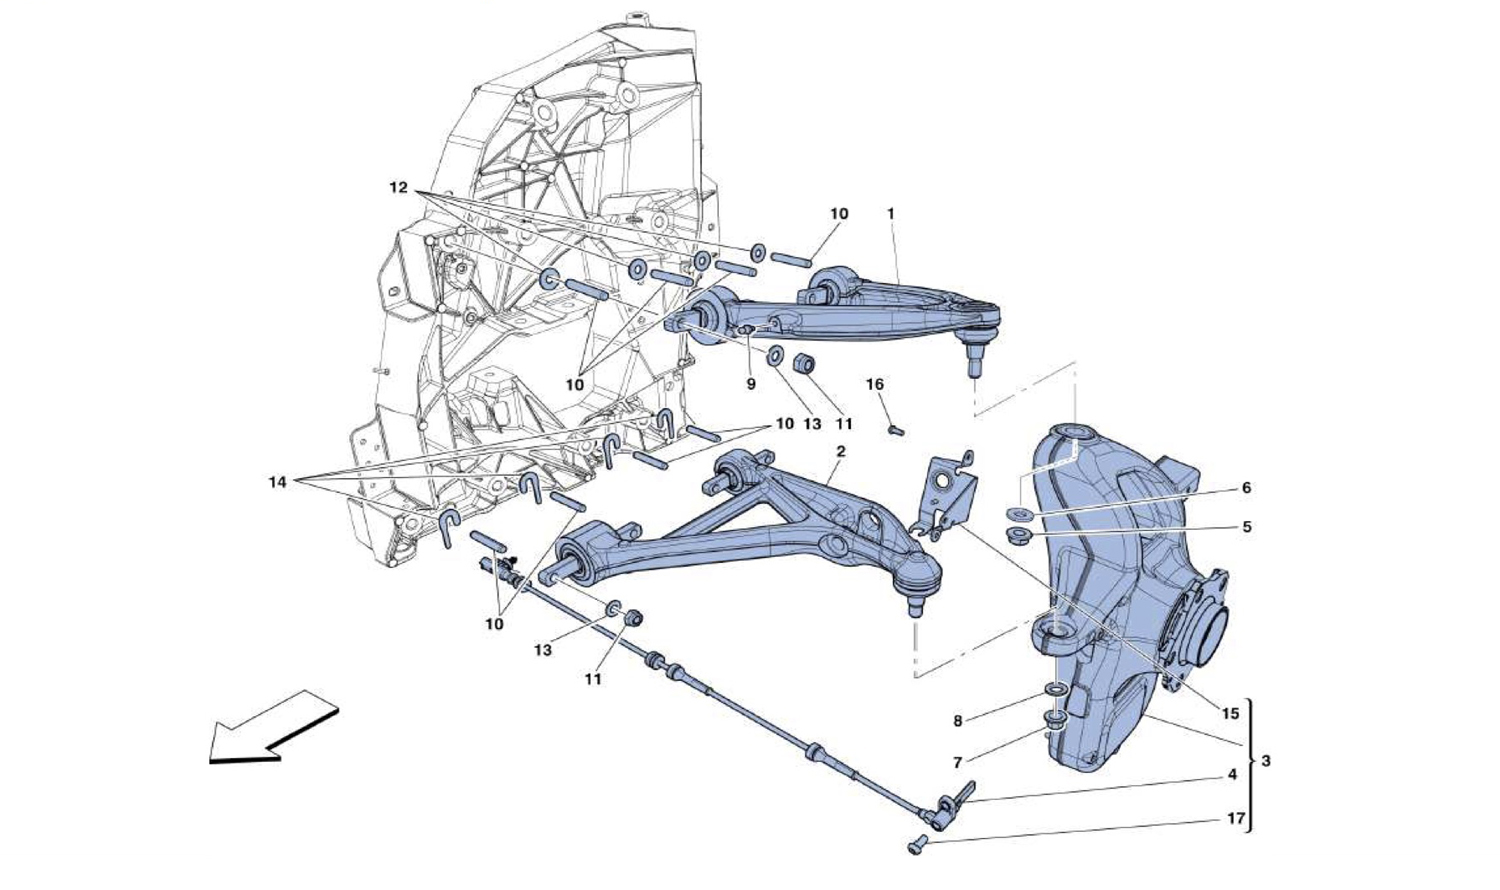 Schematic: Front Suspension - Arms